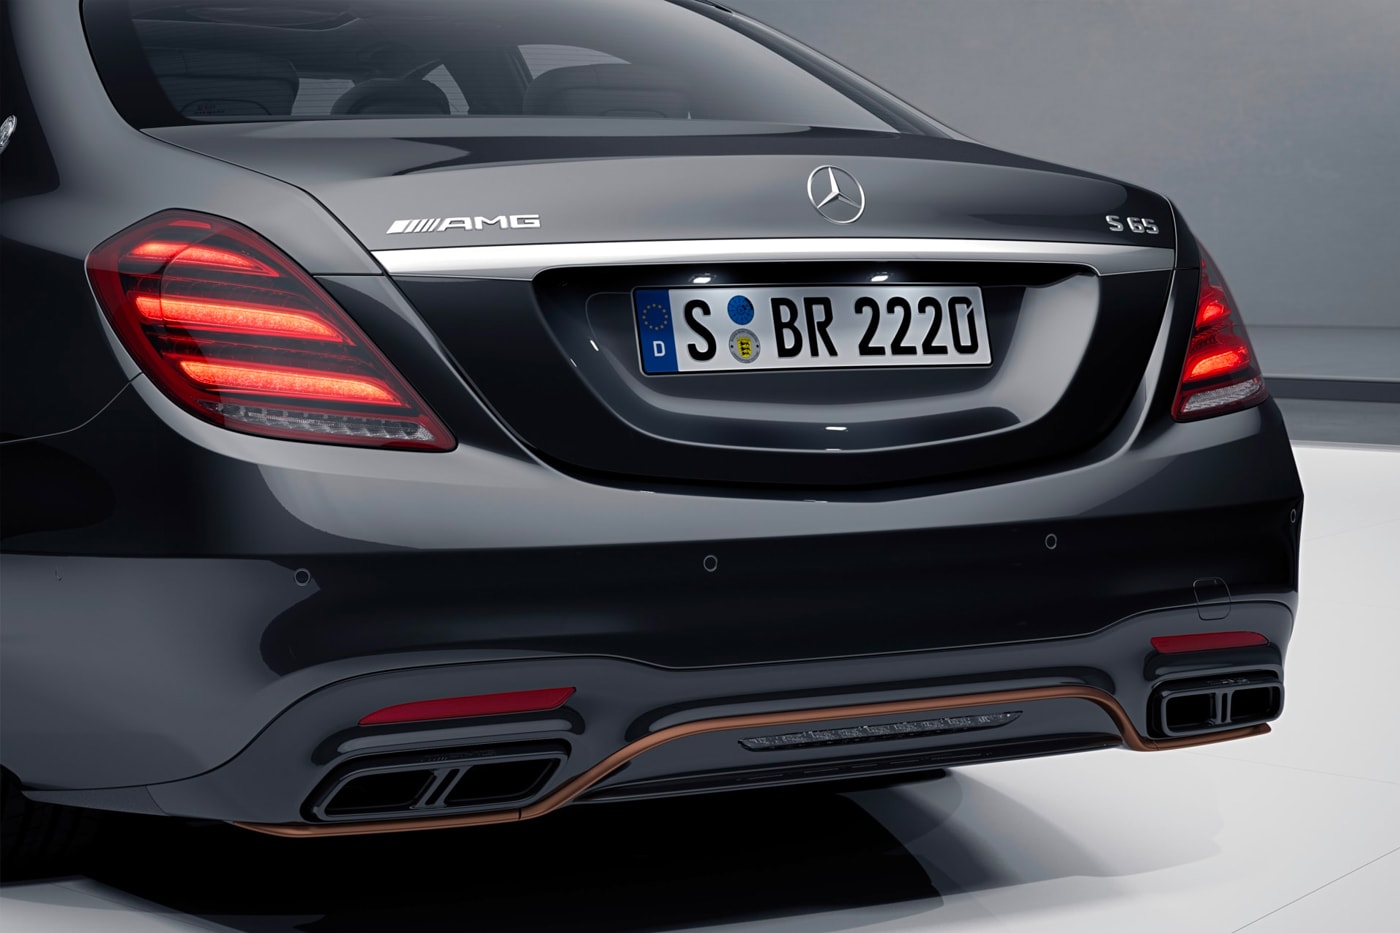 Mercedes AMG S65 S Class Final Edition Release german car engineering driving motorsport